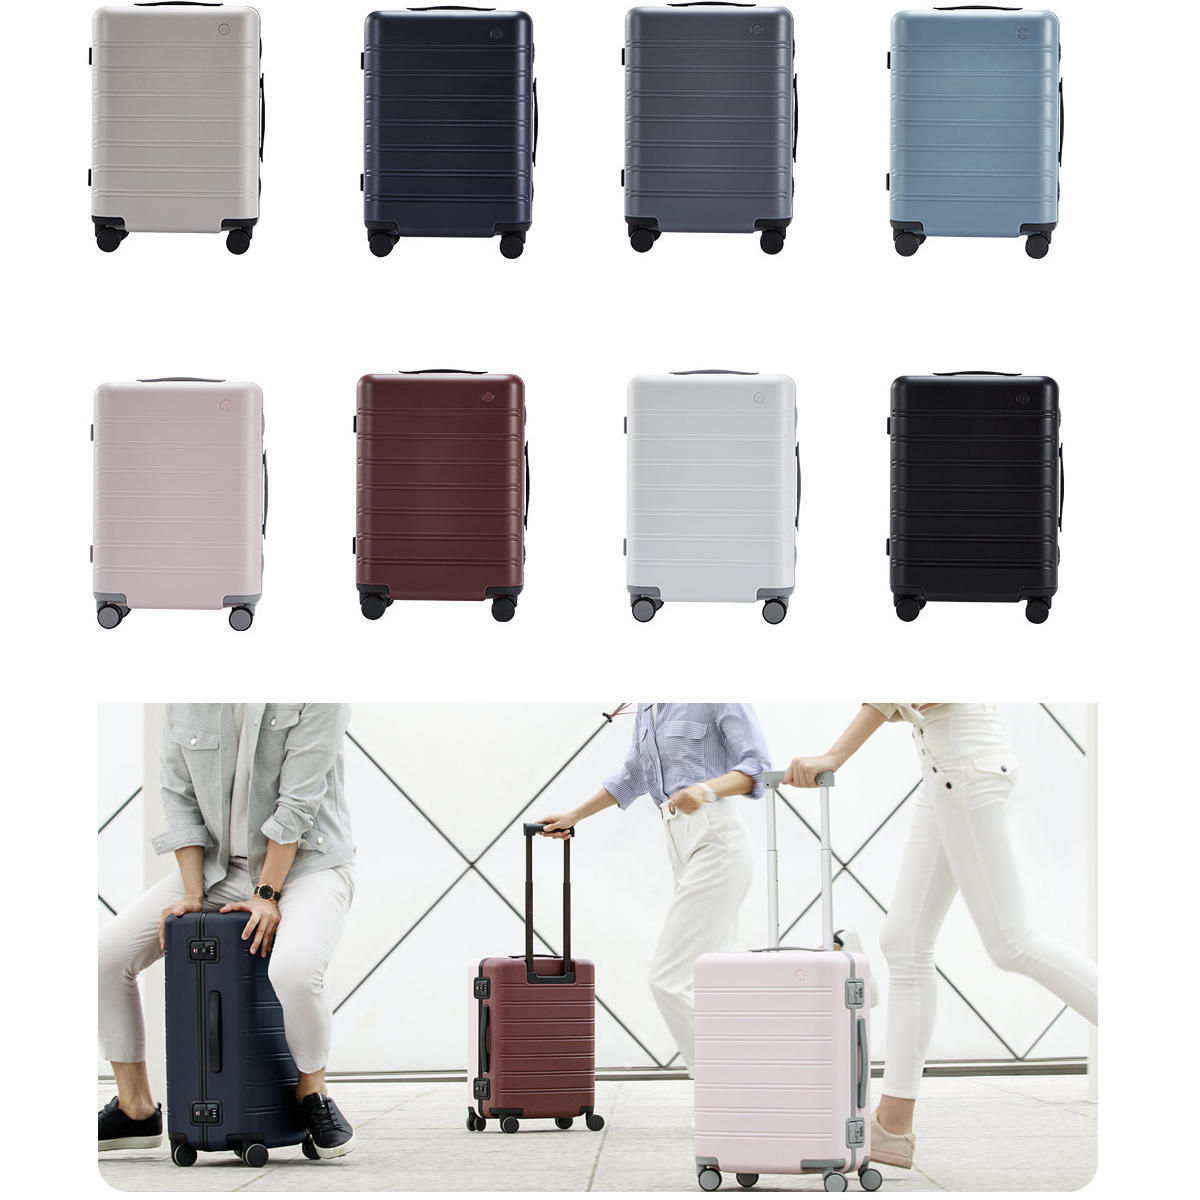  Suitcase 90FUN 24inch Suitcase 66L Aluminum Alloy TSA Lock Universal Wheel Carry On Luggage Case from 